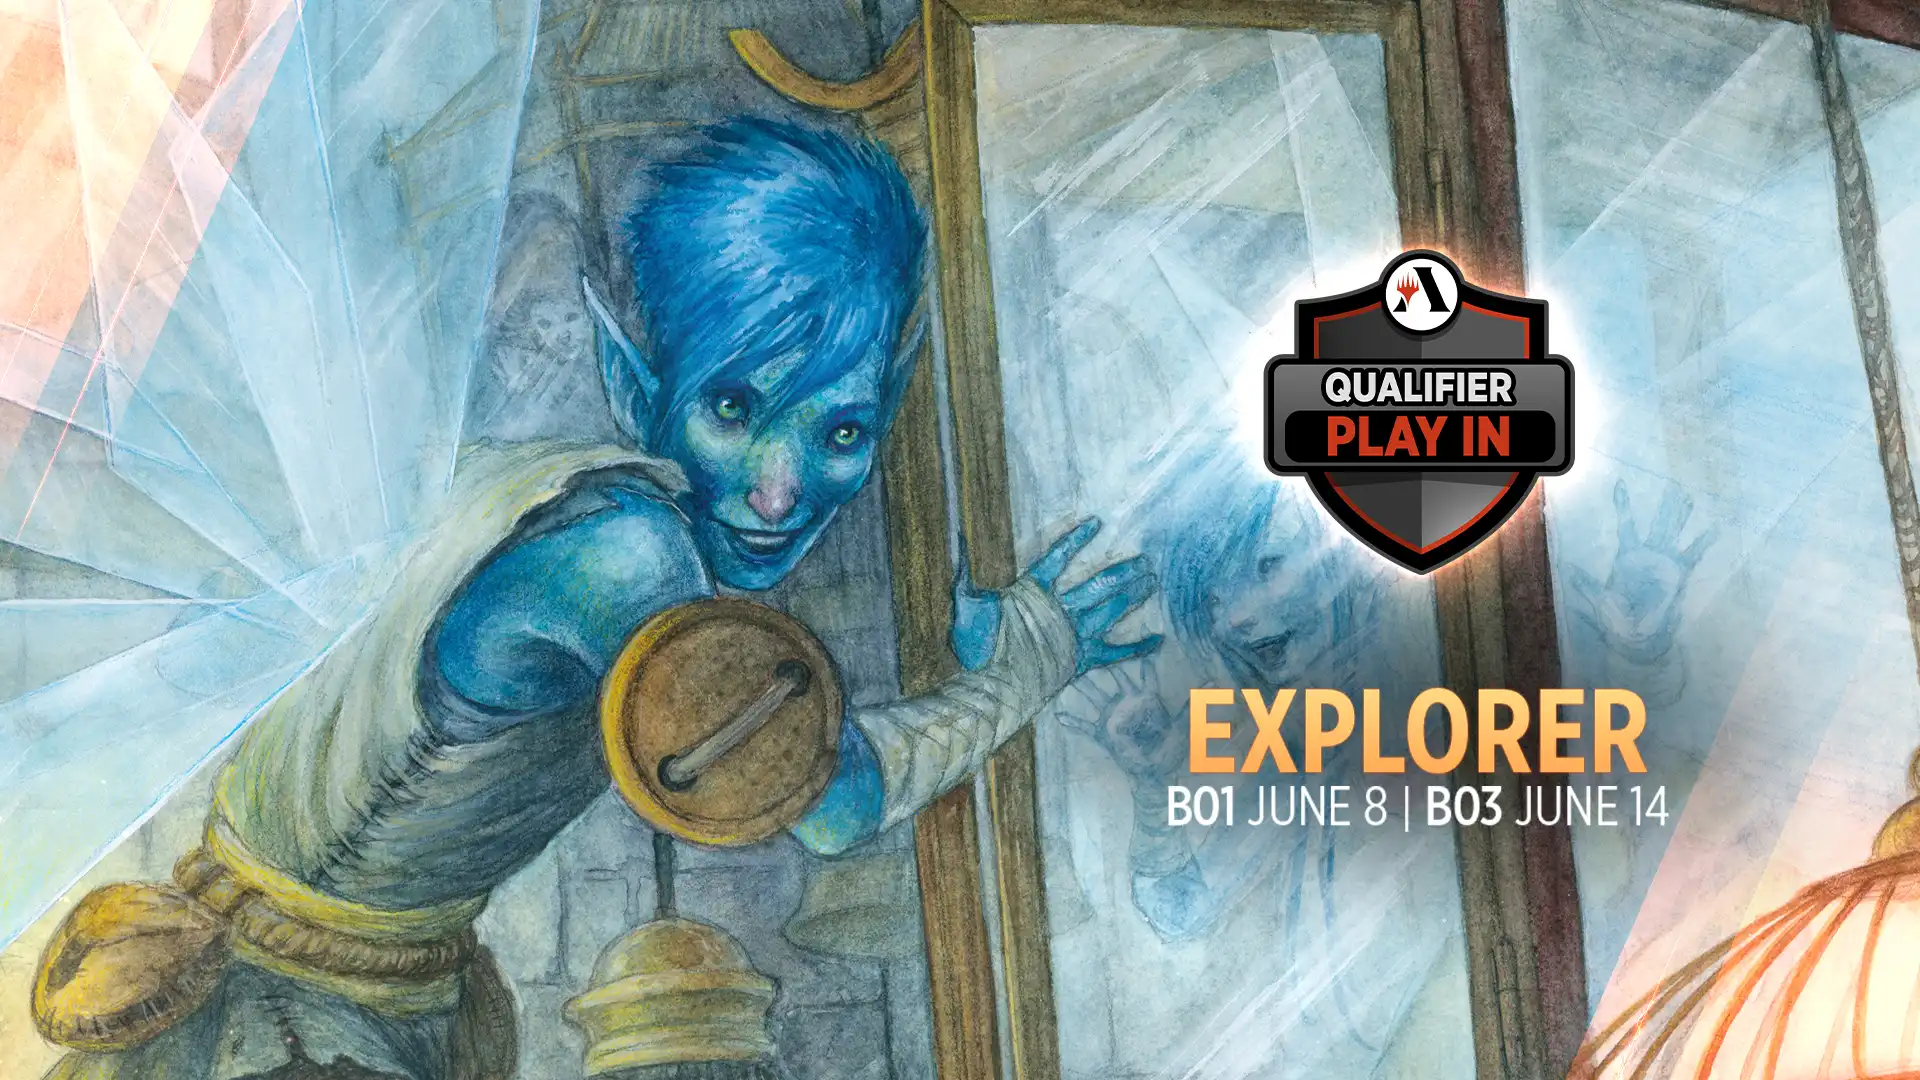 A blue faerie pushing open an window from the outside to gain entry, with the text Qualifier Play-In, Best-of-One, June 8 and Best-of-Three, June 14